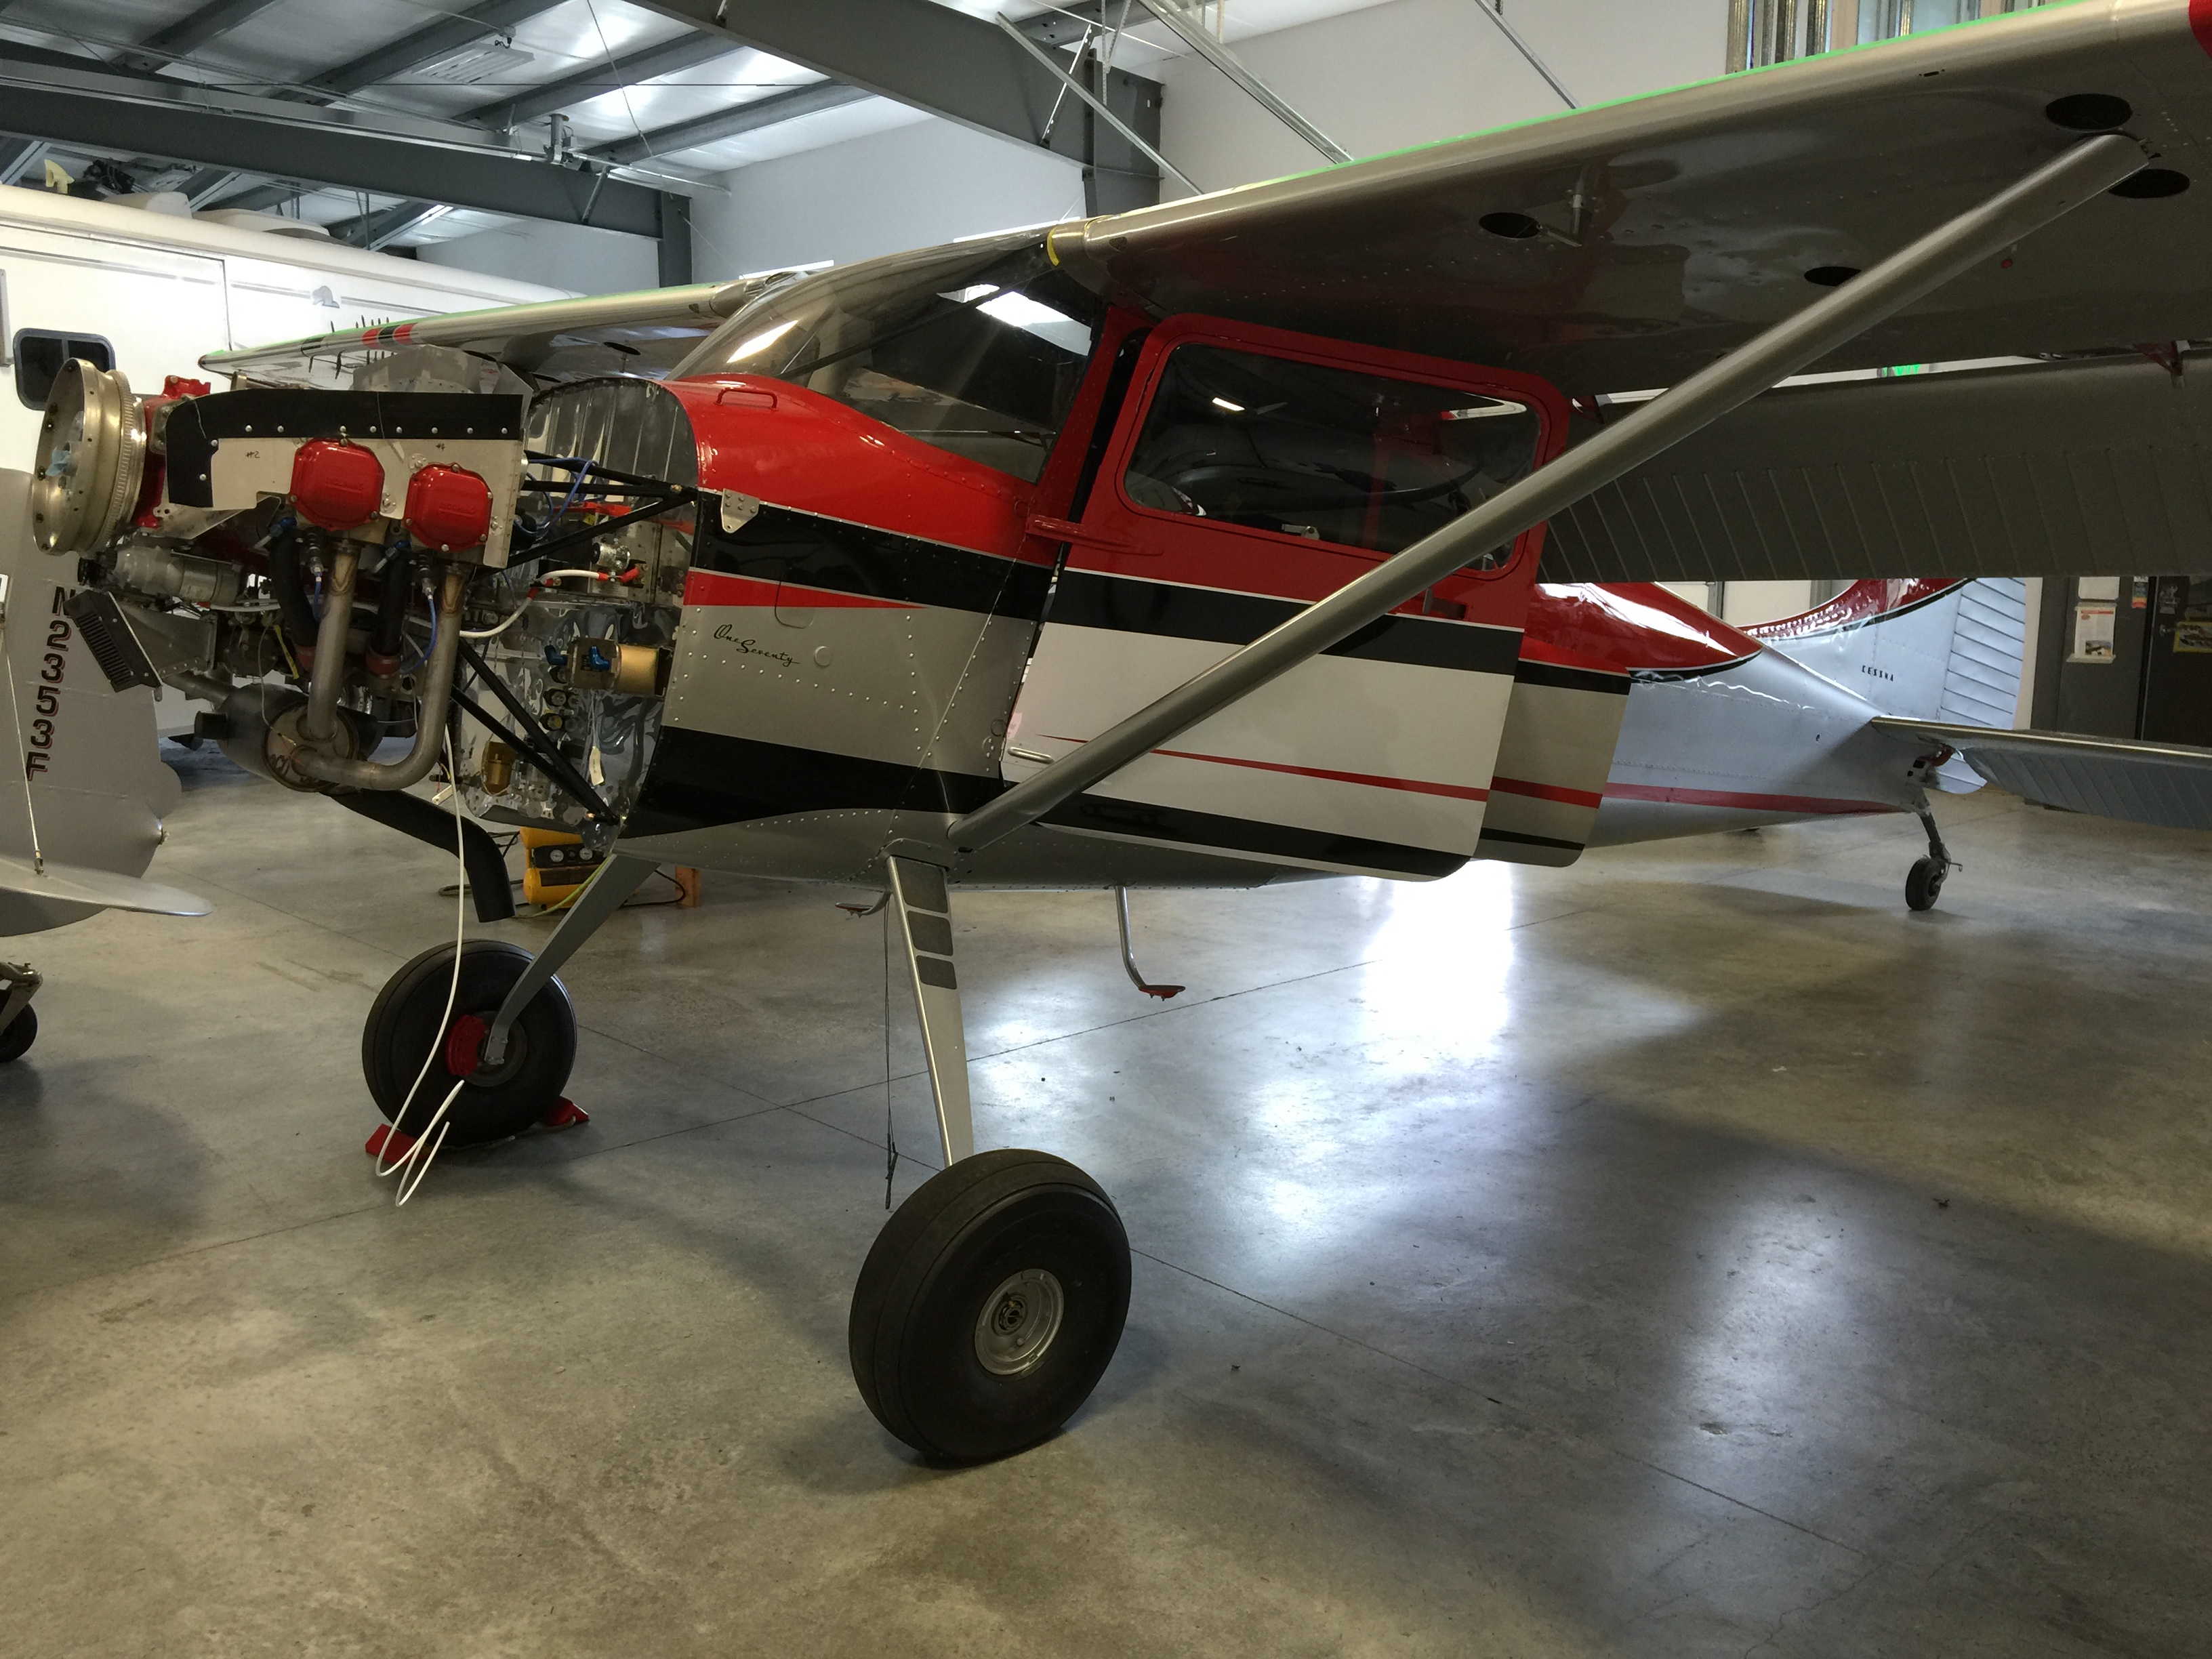 The silver, red, and black Cessna 170B awaits a prop installation. Photos courtesy of Kyle Fosso.